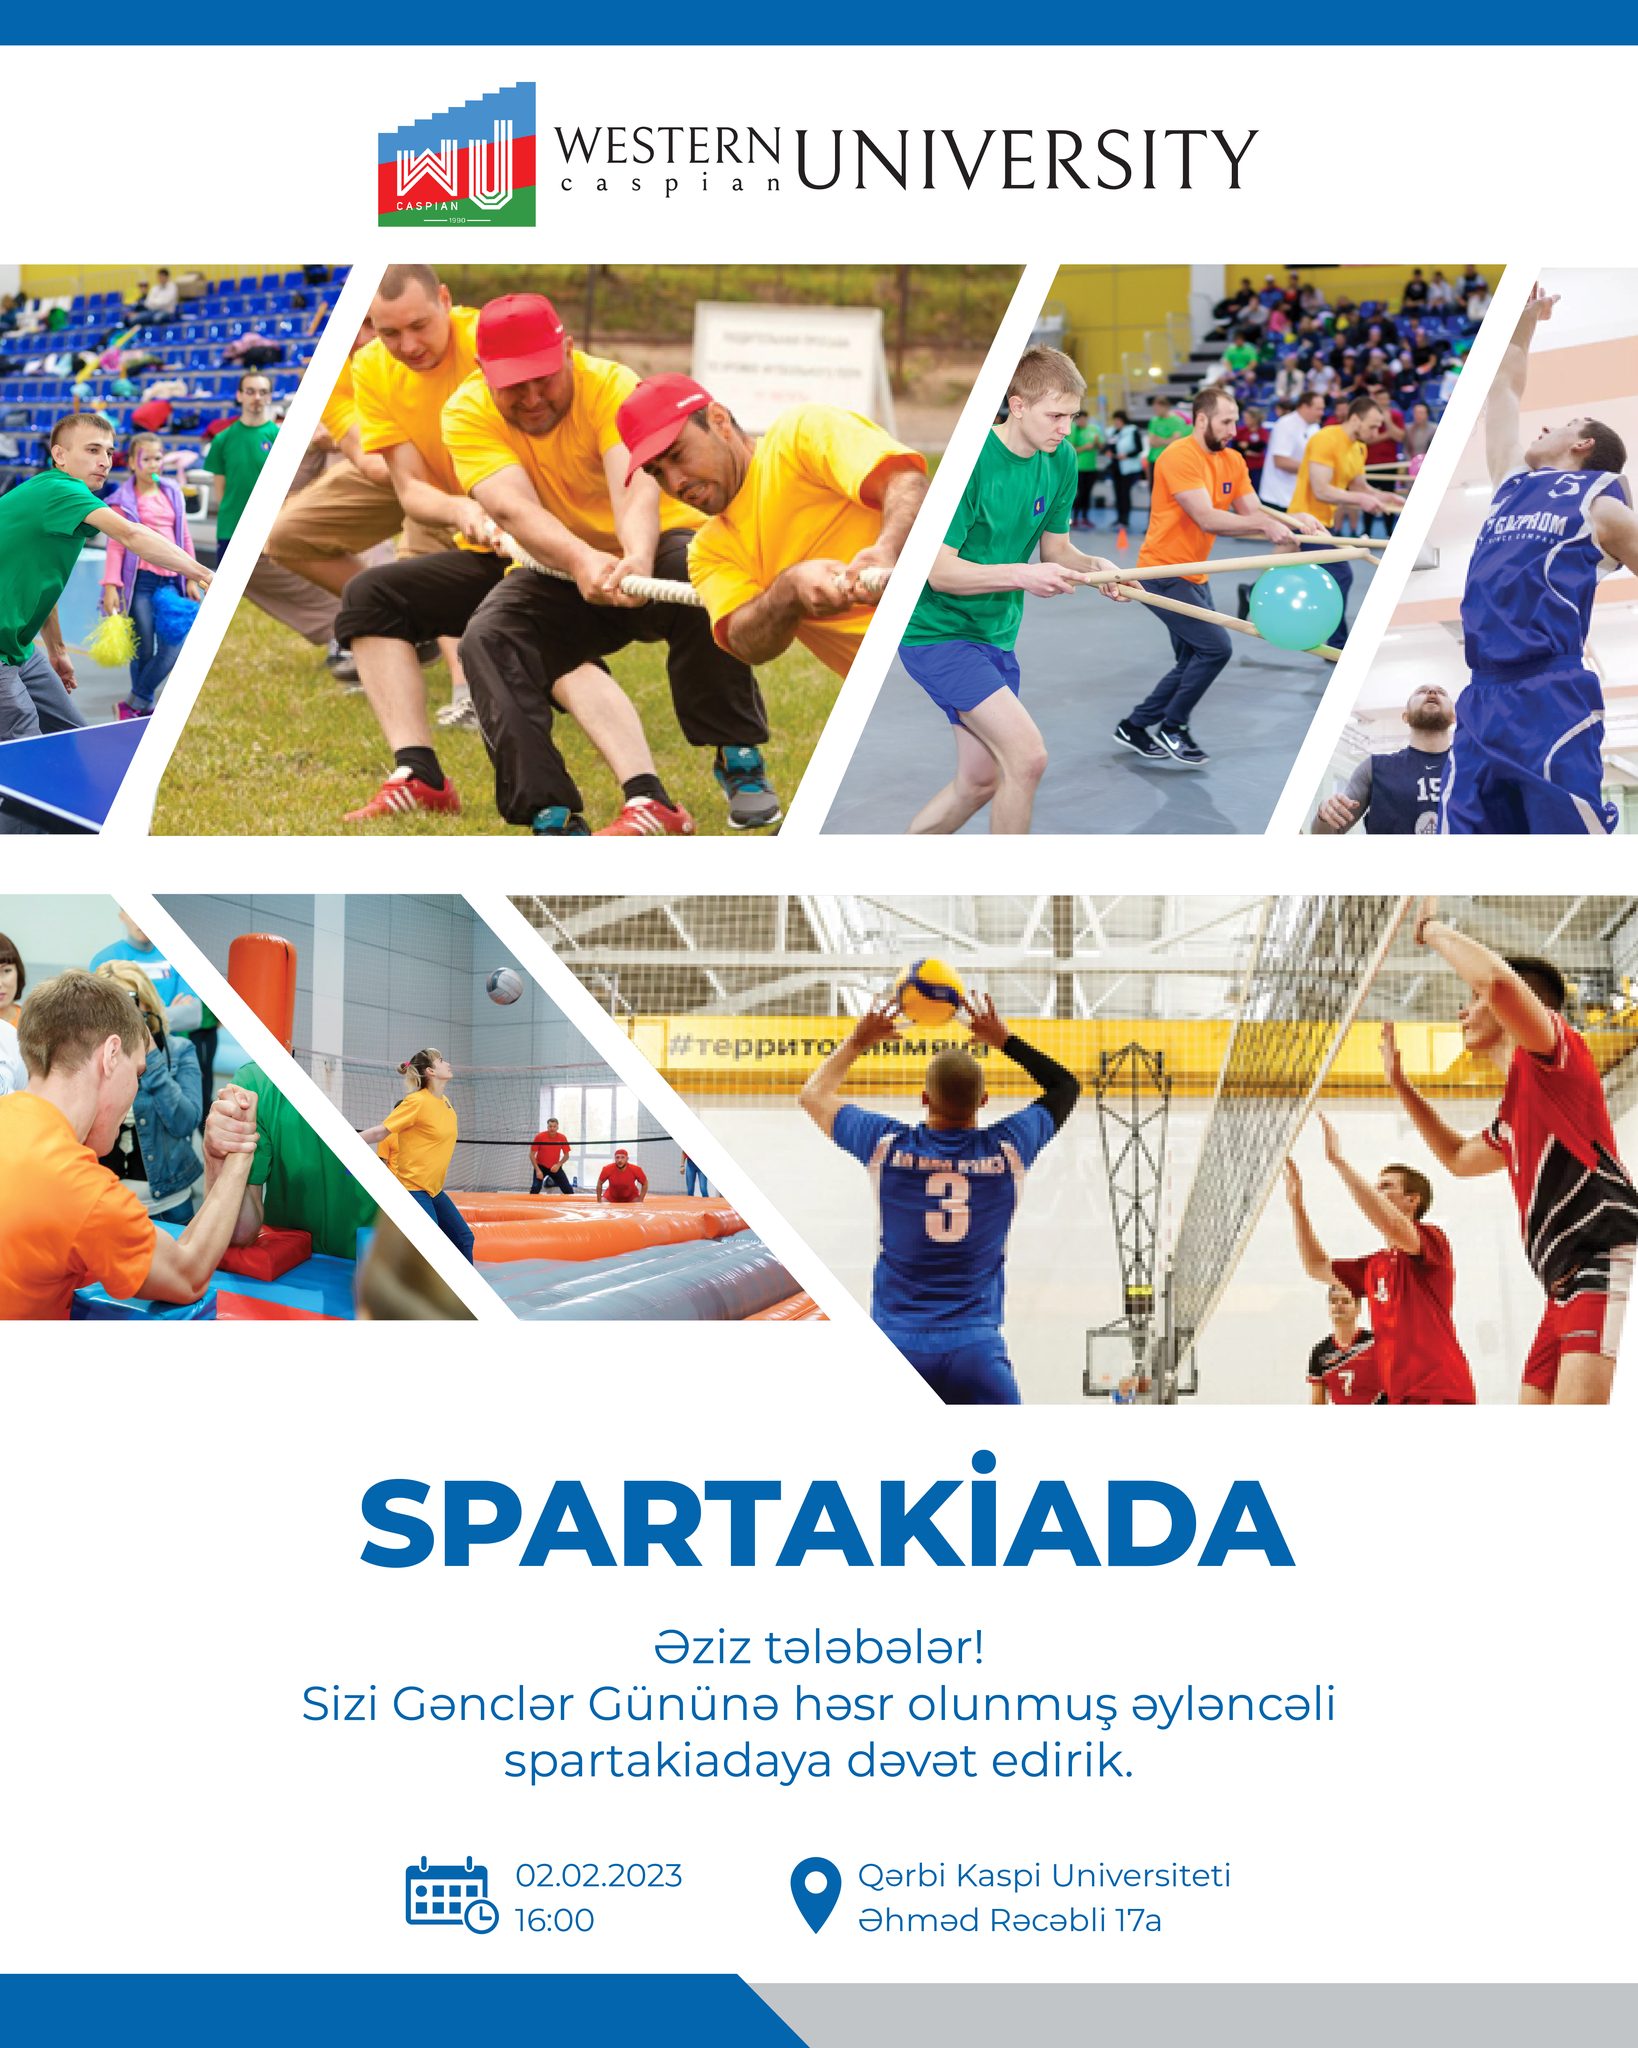 Dear students, we invite you to a fun Spartakiada dedicated to Youth Day!